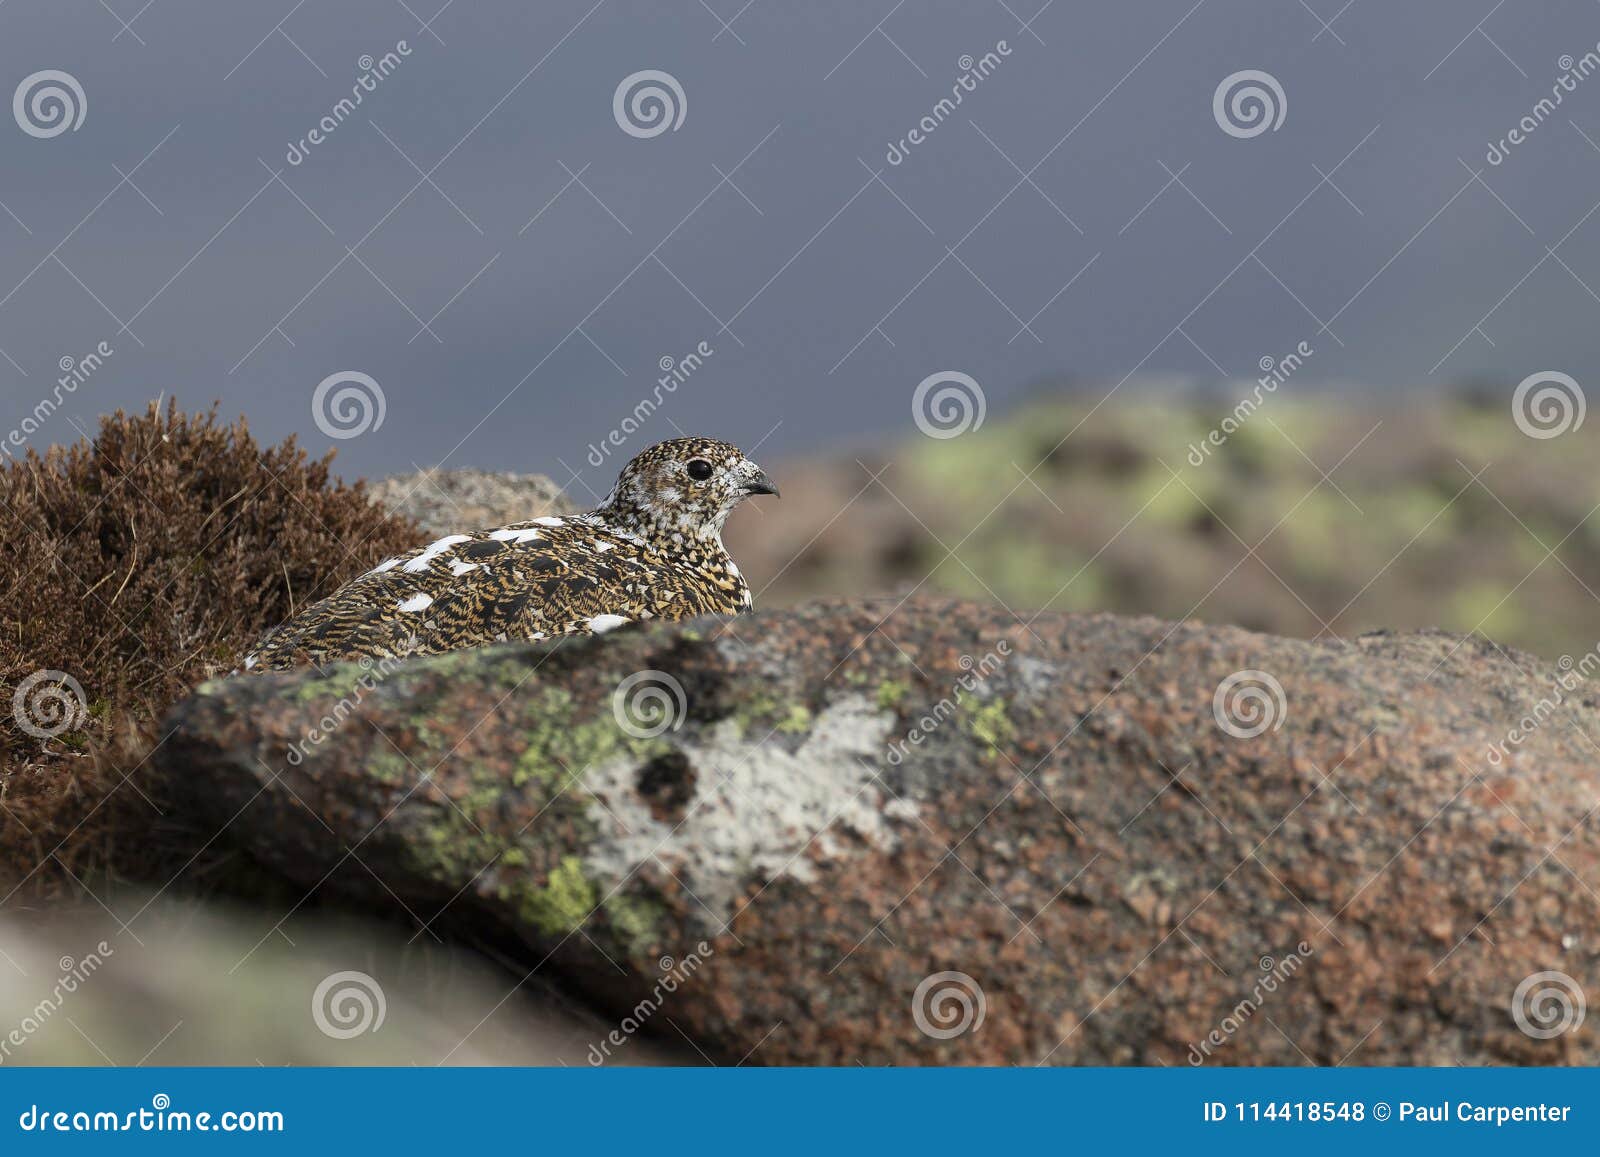 ptarmigan, lagopus muta, close up pose during a sunny spring day in the cairngorms national park